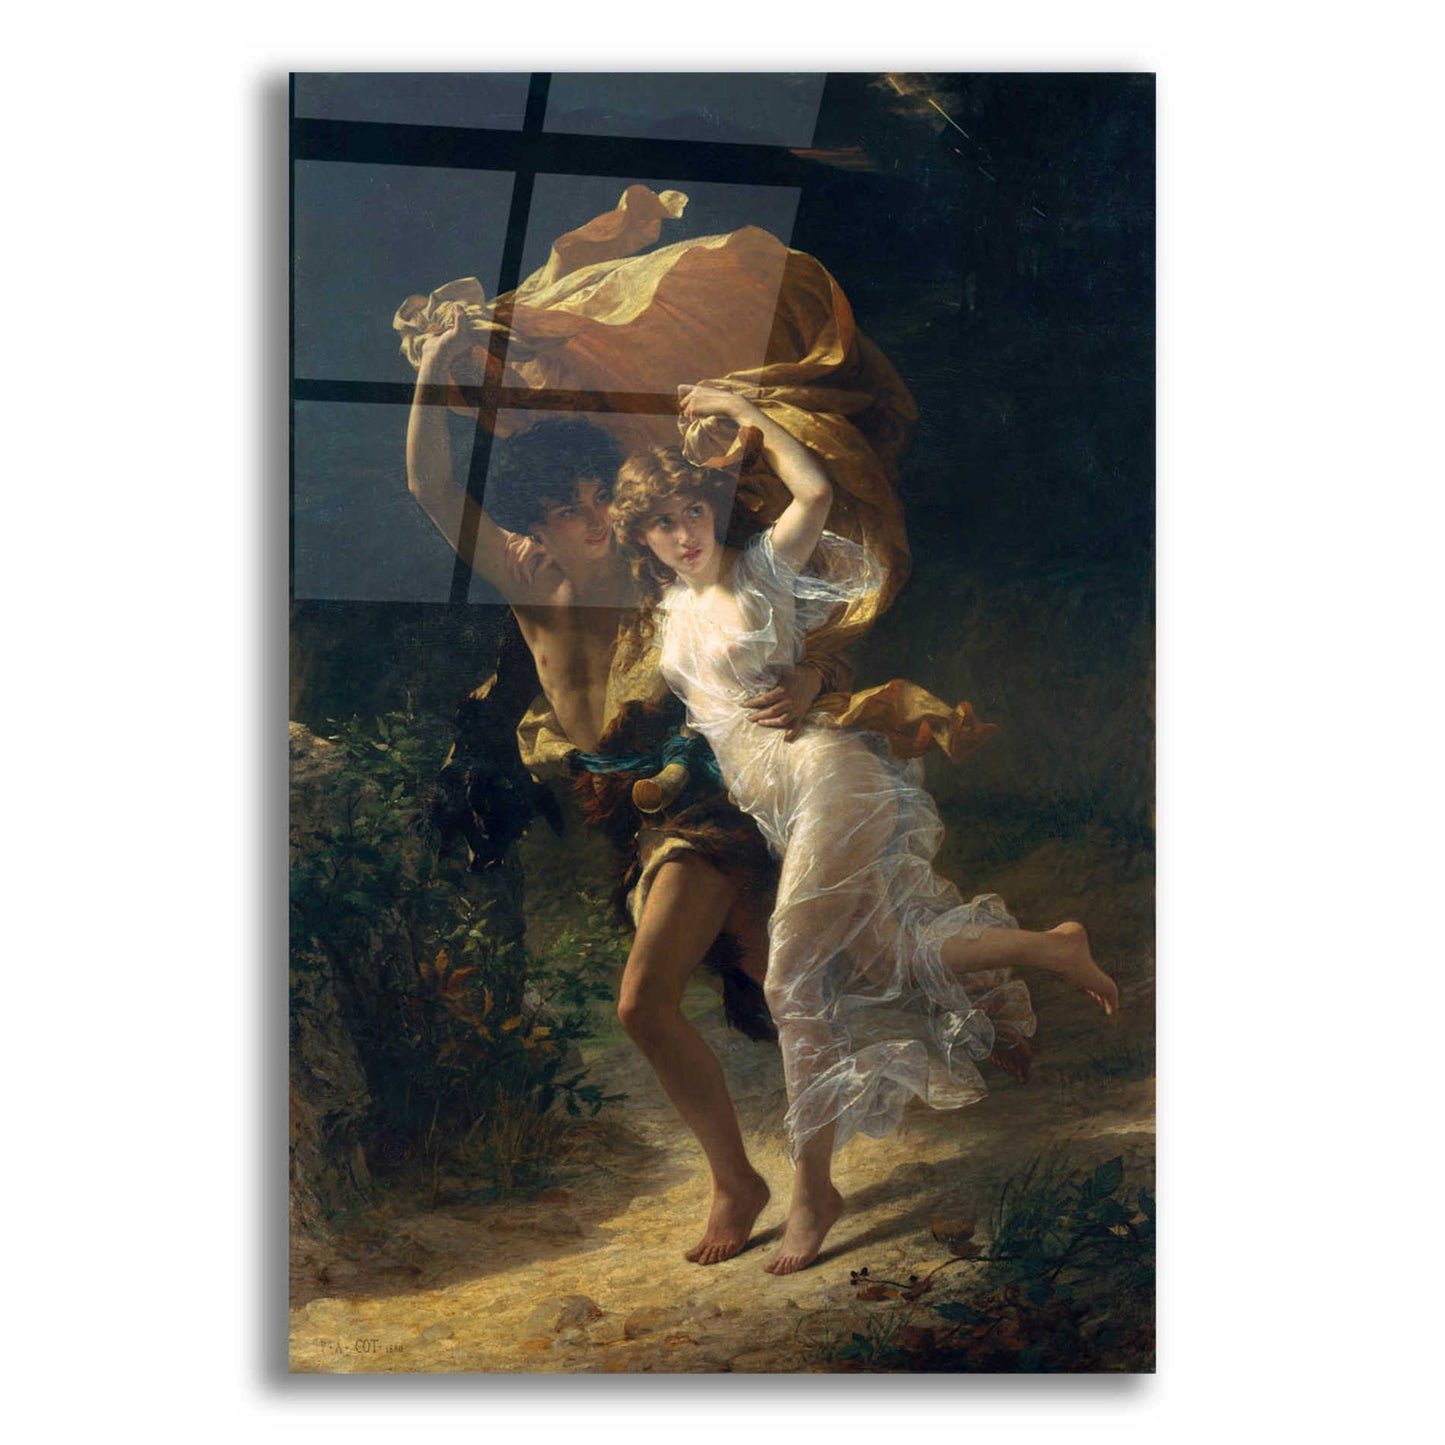 Epic Art 'The Storm' by Pierre Auguste Cot, Acrylic Glass Wall Art,12x18x1.1x0,18x26x1.1x0,26x40x1.74x0,40x60x1.74x0